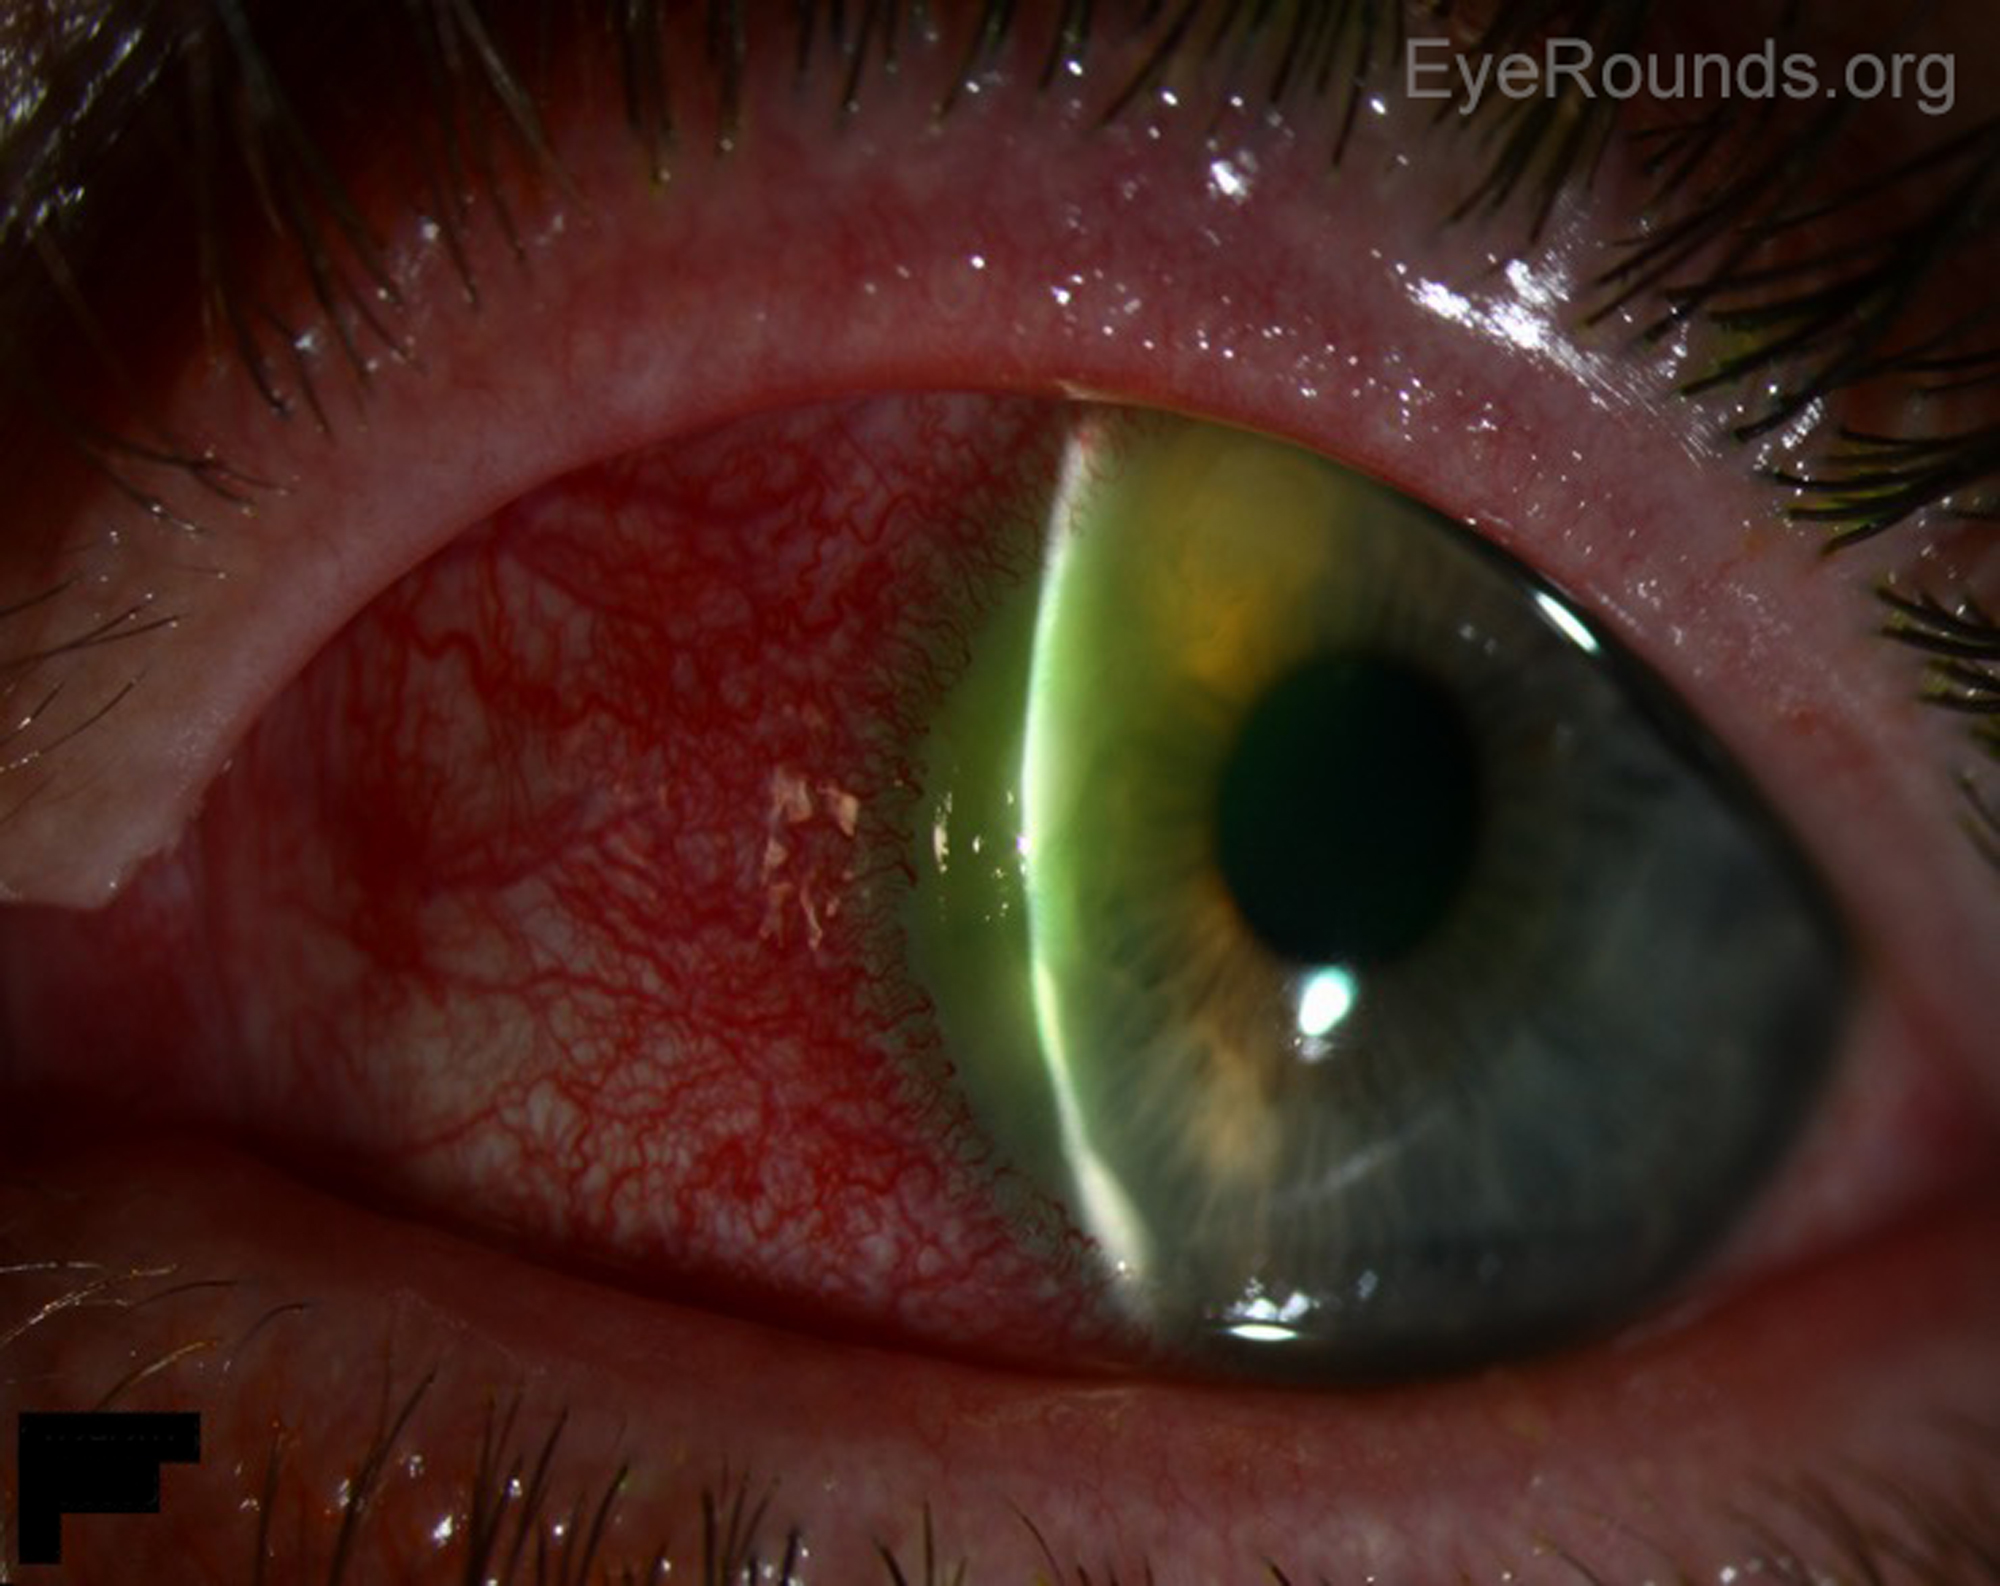 Treatment Of Herpes Simplex Corneal Ulcers